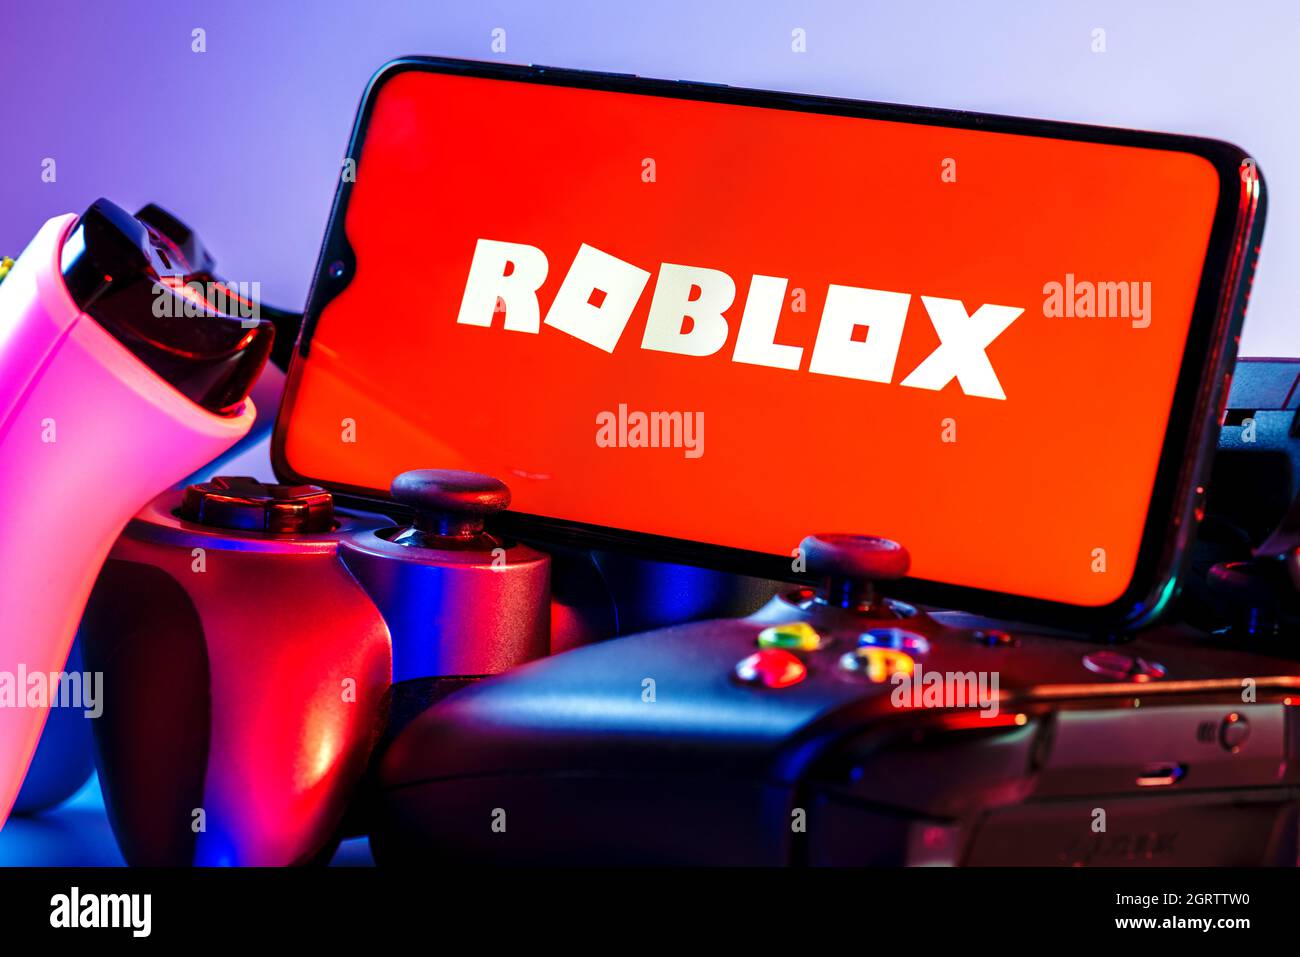 What Platforms Can I Play Roblox On?